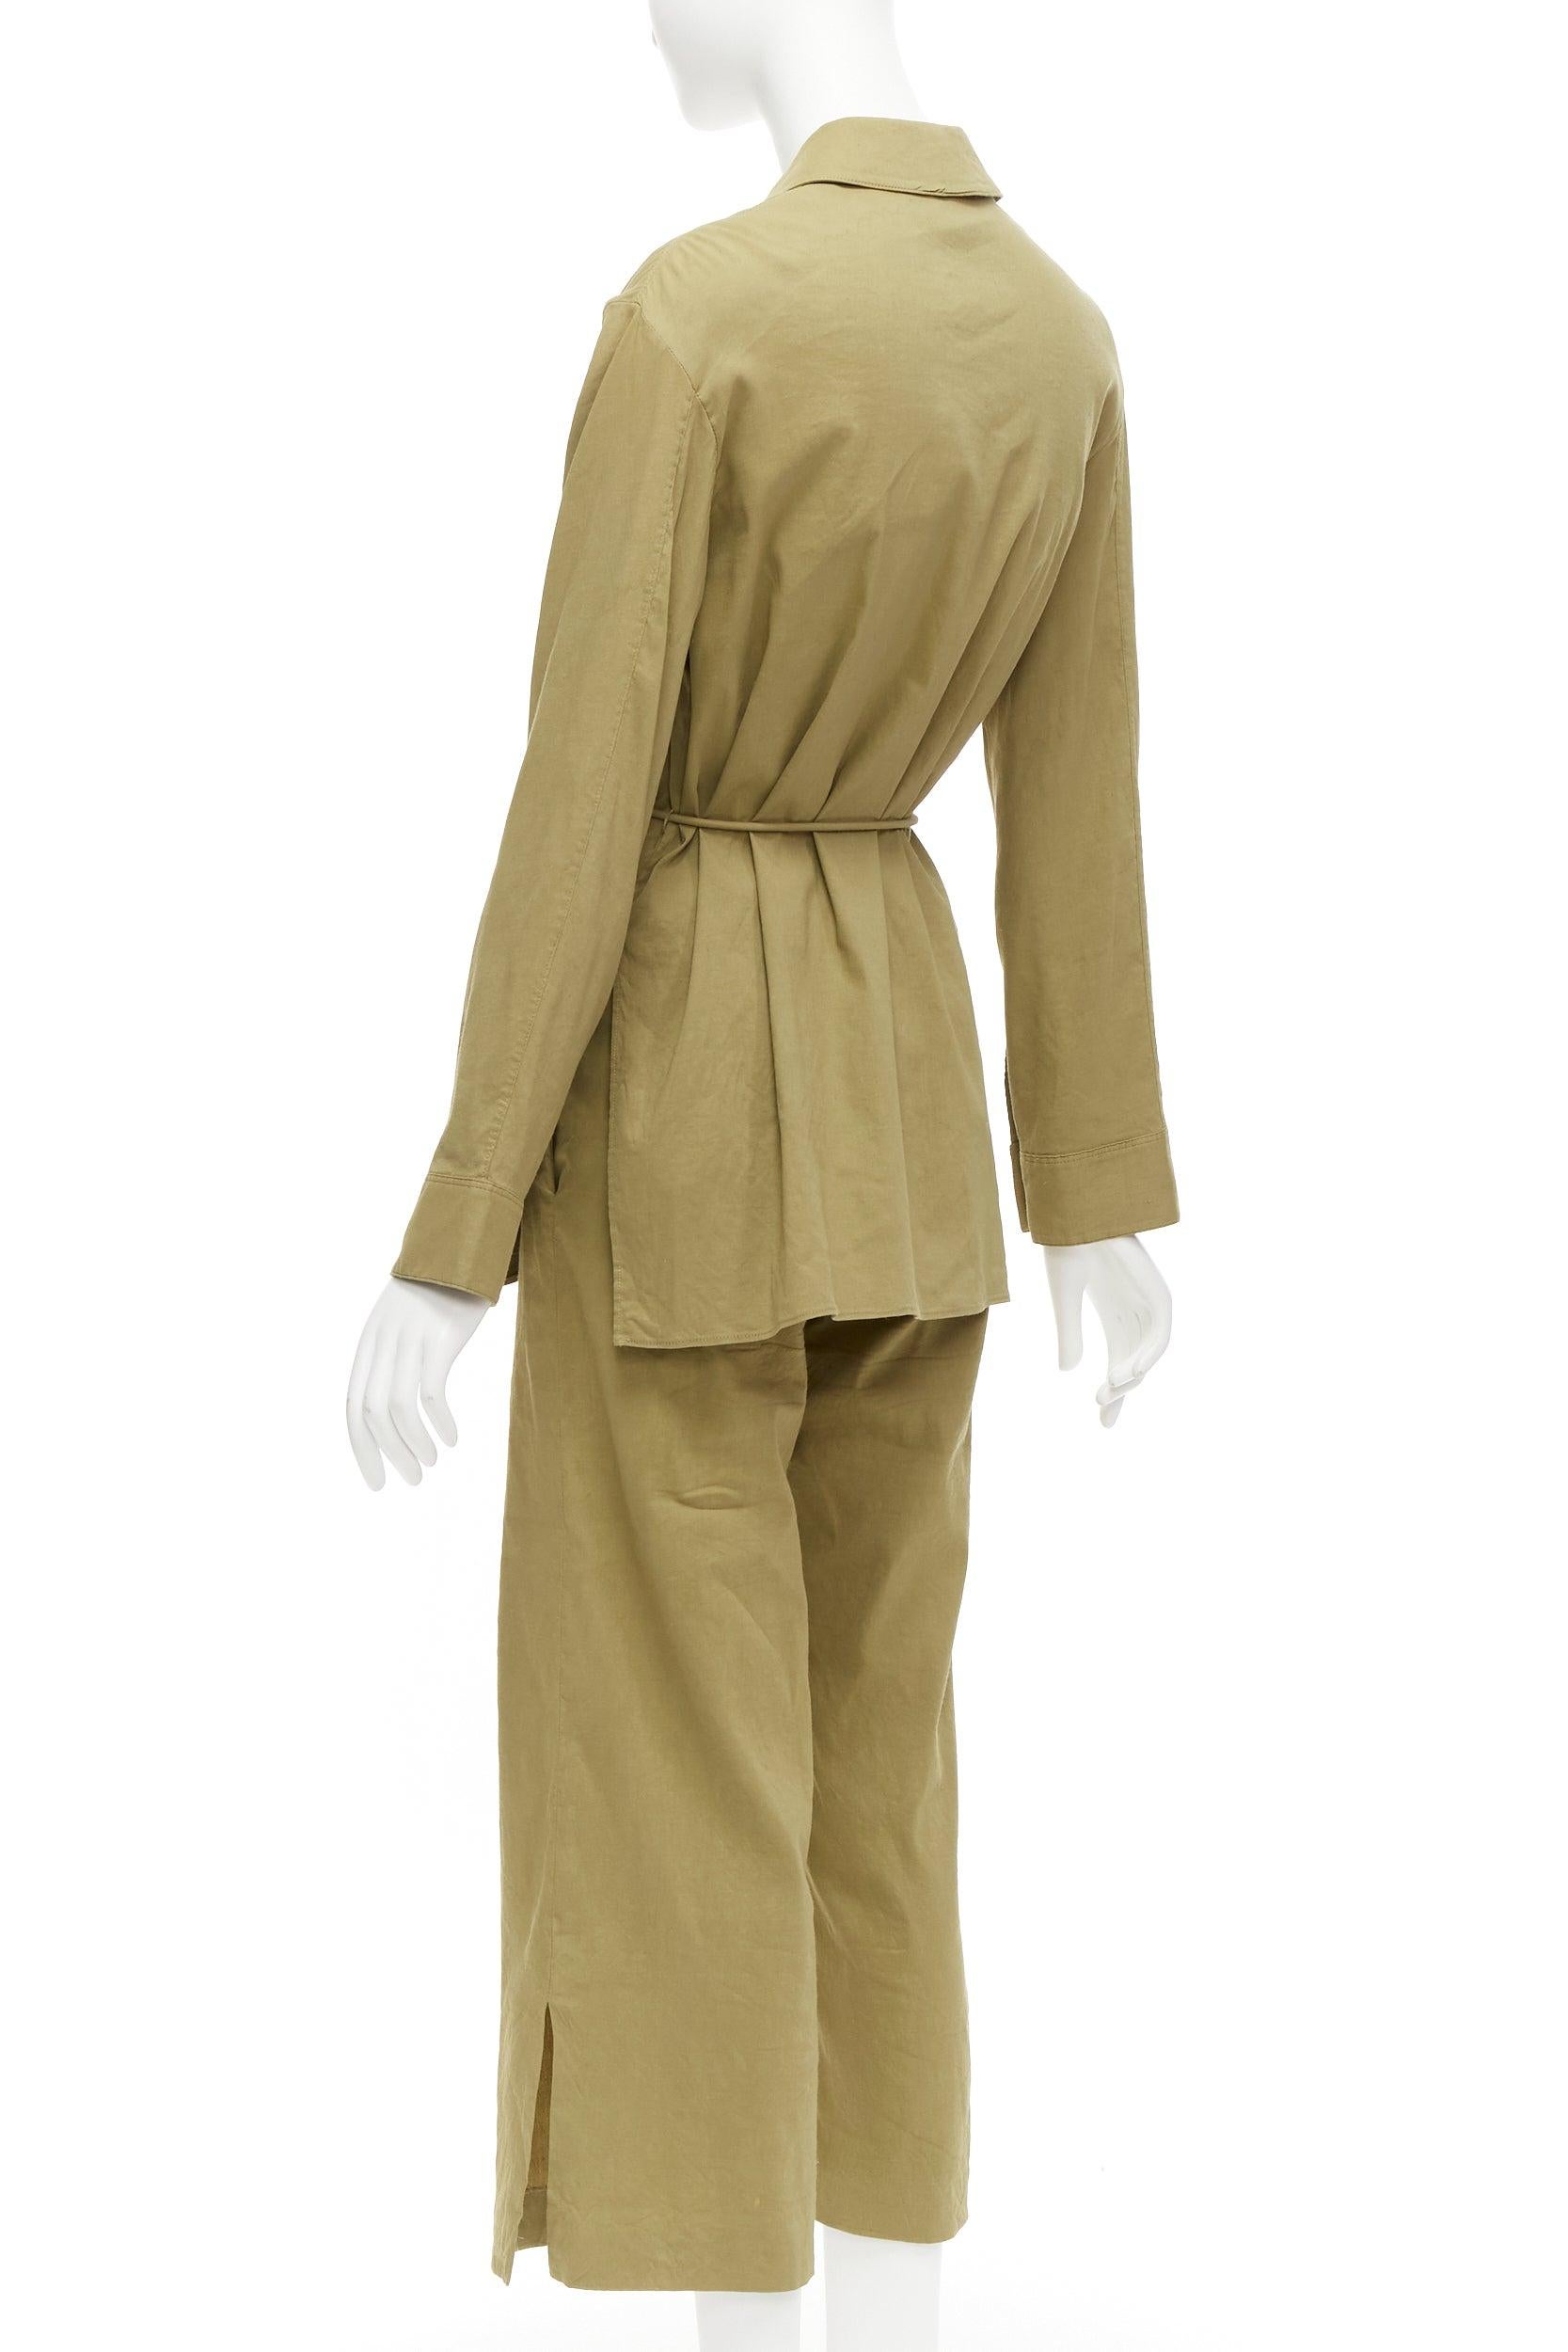 THEORY olive green linen blend tie belt relaxed jacket wide leg pants set US0 XS For Sale 1